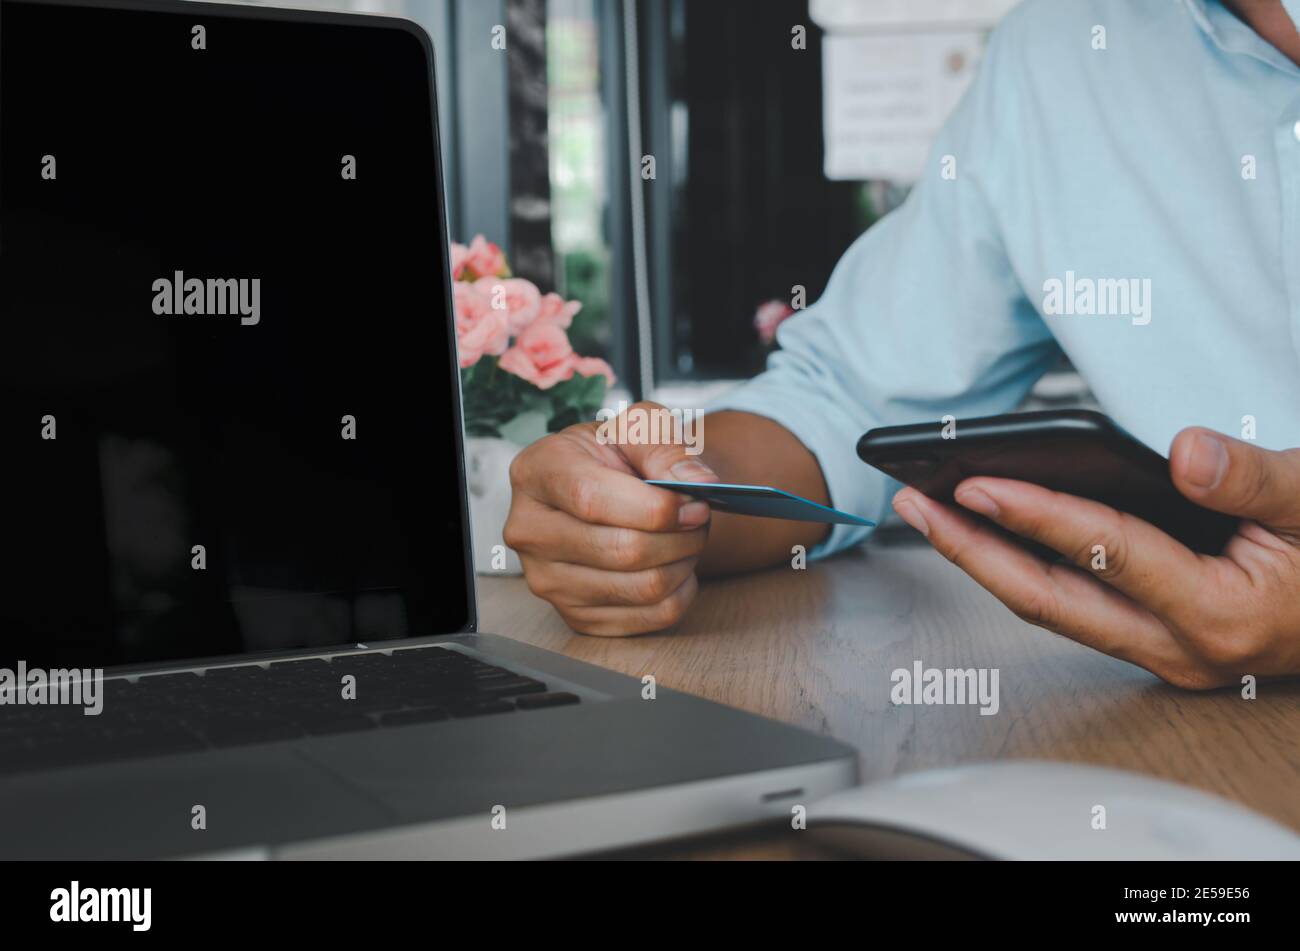 business man hand using mobile smart phone and credit card  with computer laptop on table.Shop online and make payment transactions business concept Stock Photo